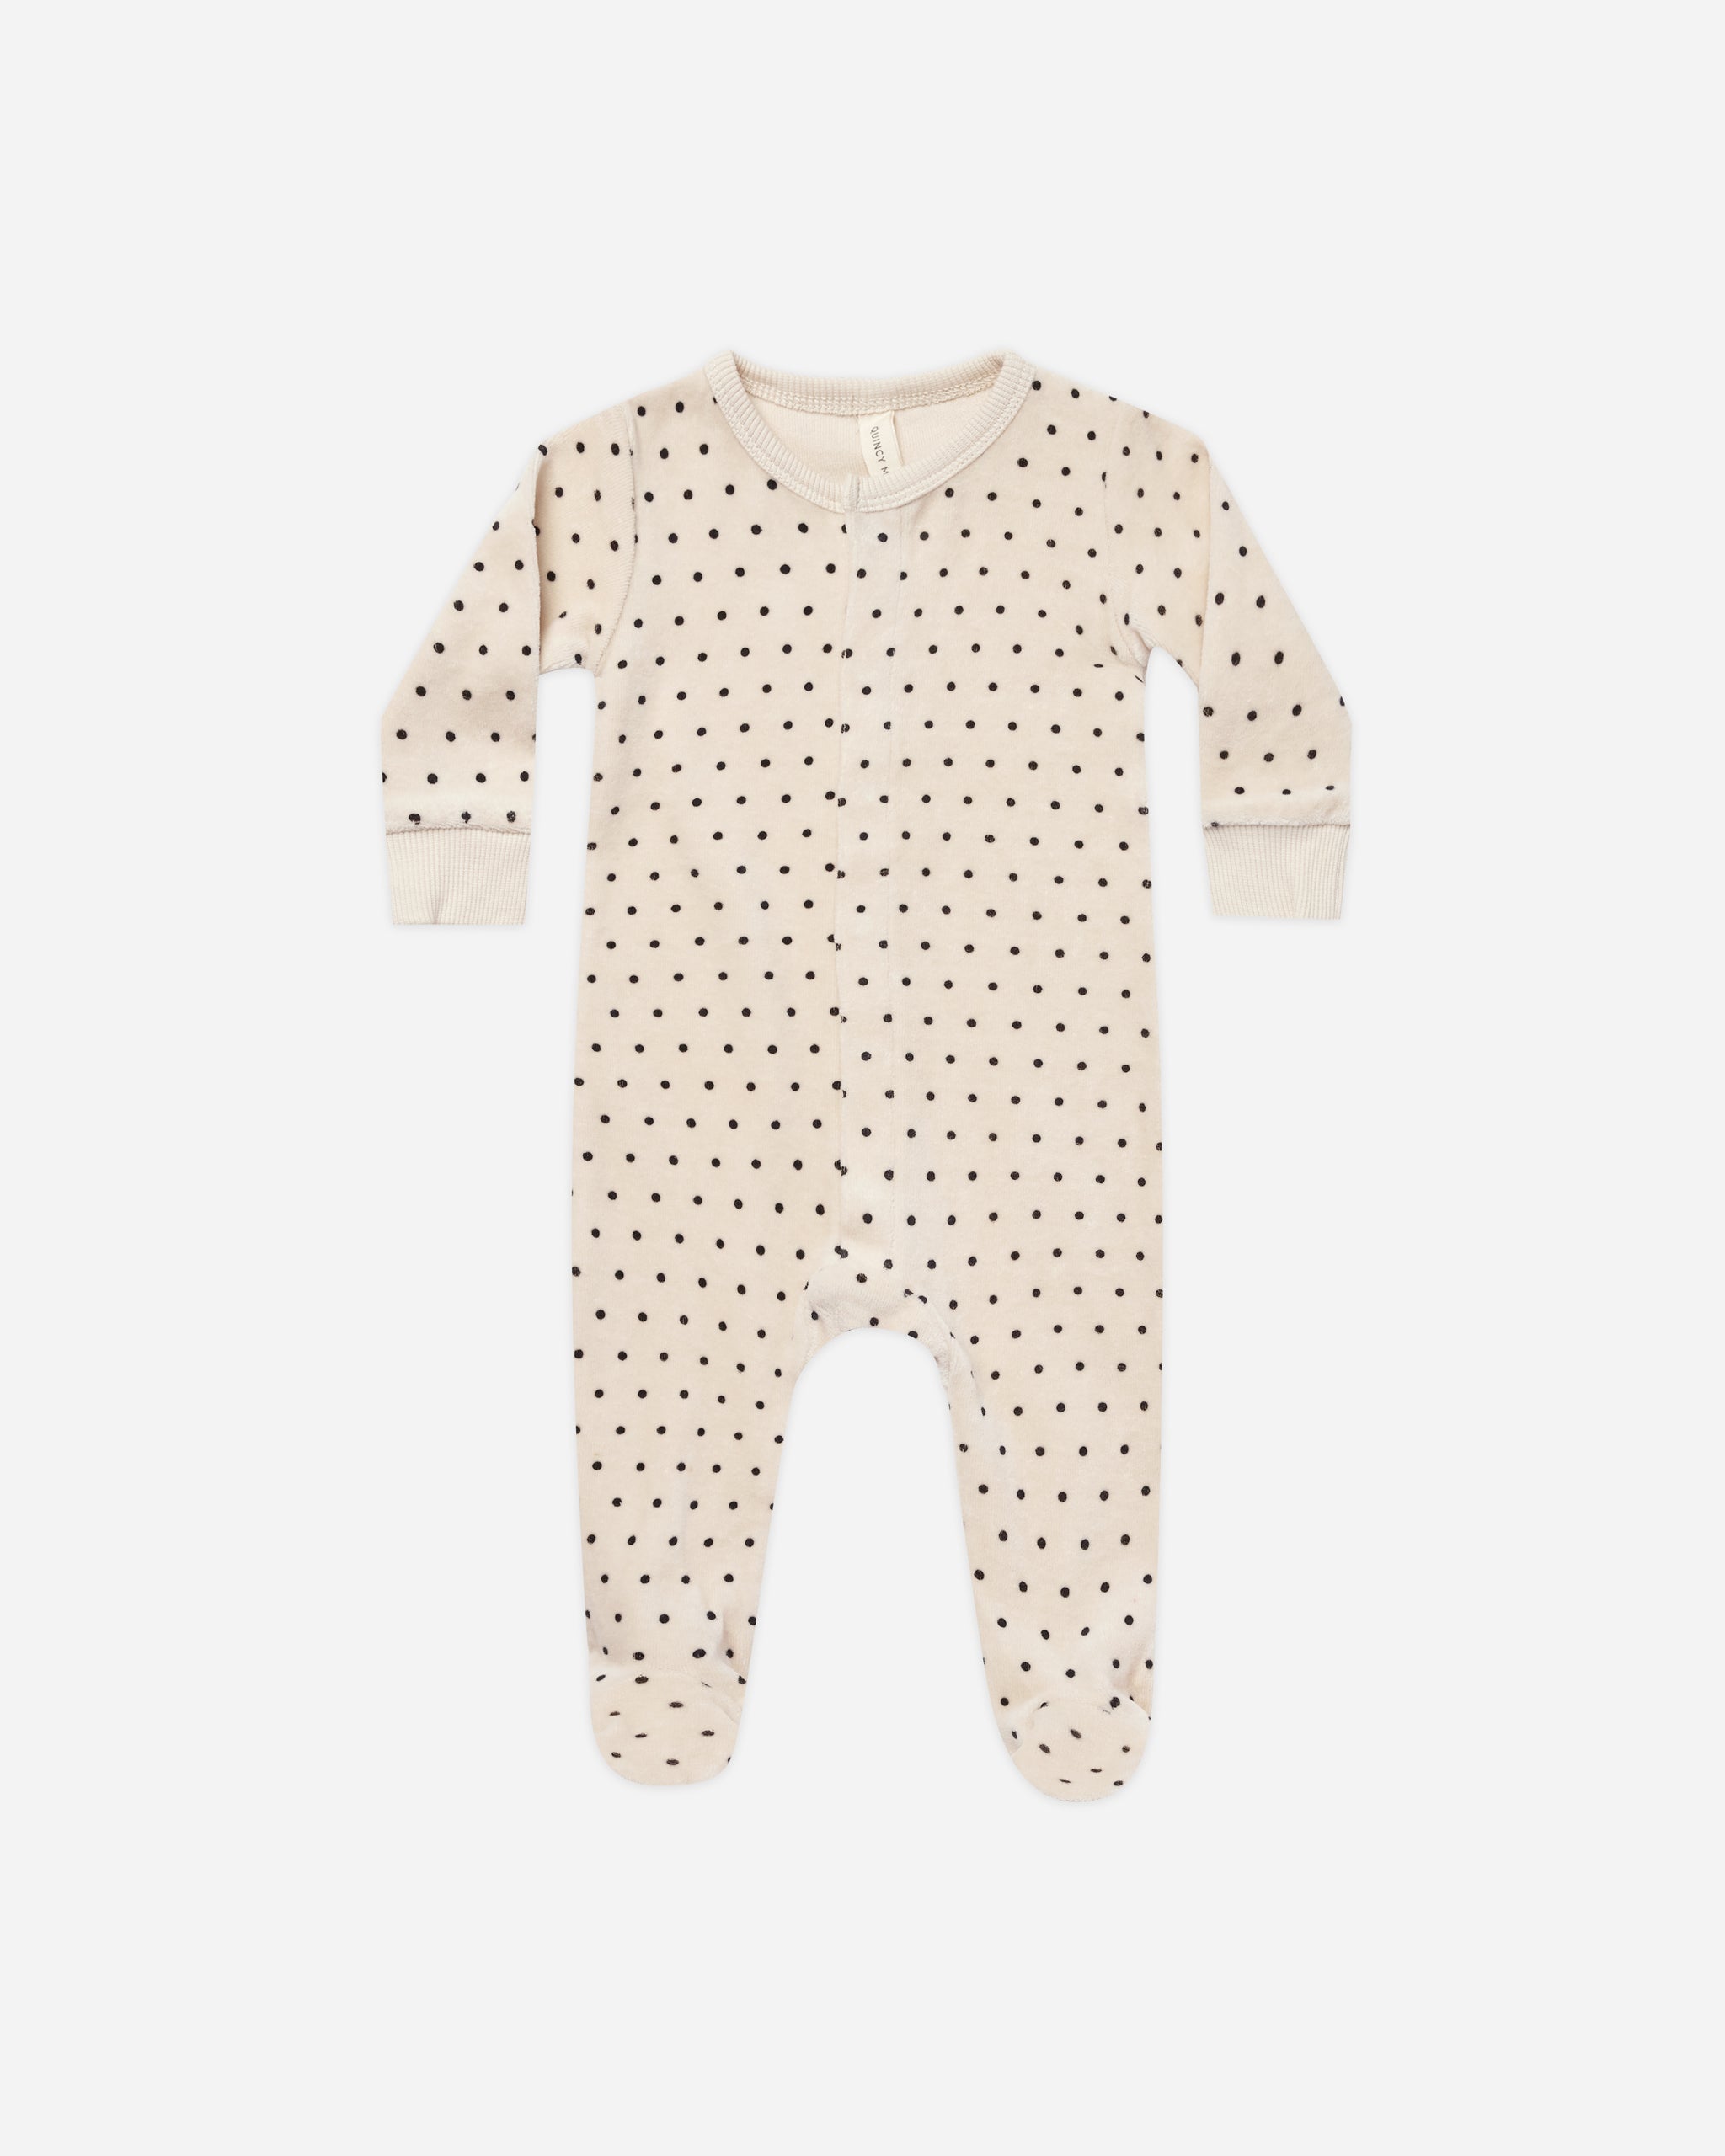 Velour Hidden Snap Footie || Polka Dot - Rylee + Cru | Kids Clothes | Trendy Baby Clothes | Modern Infant Outfits |